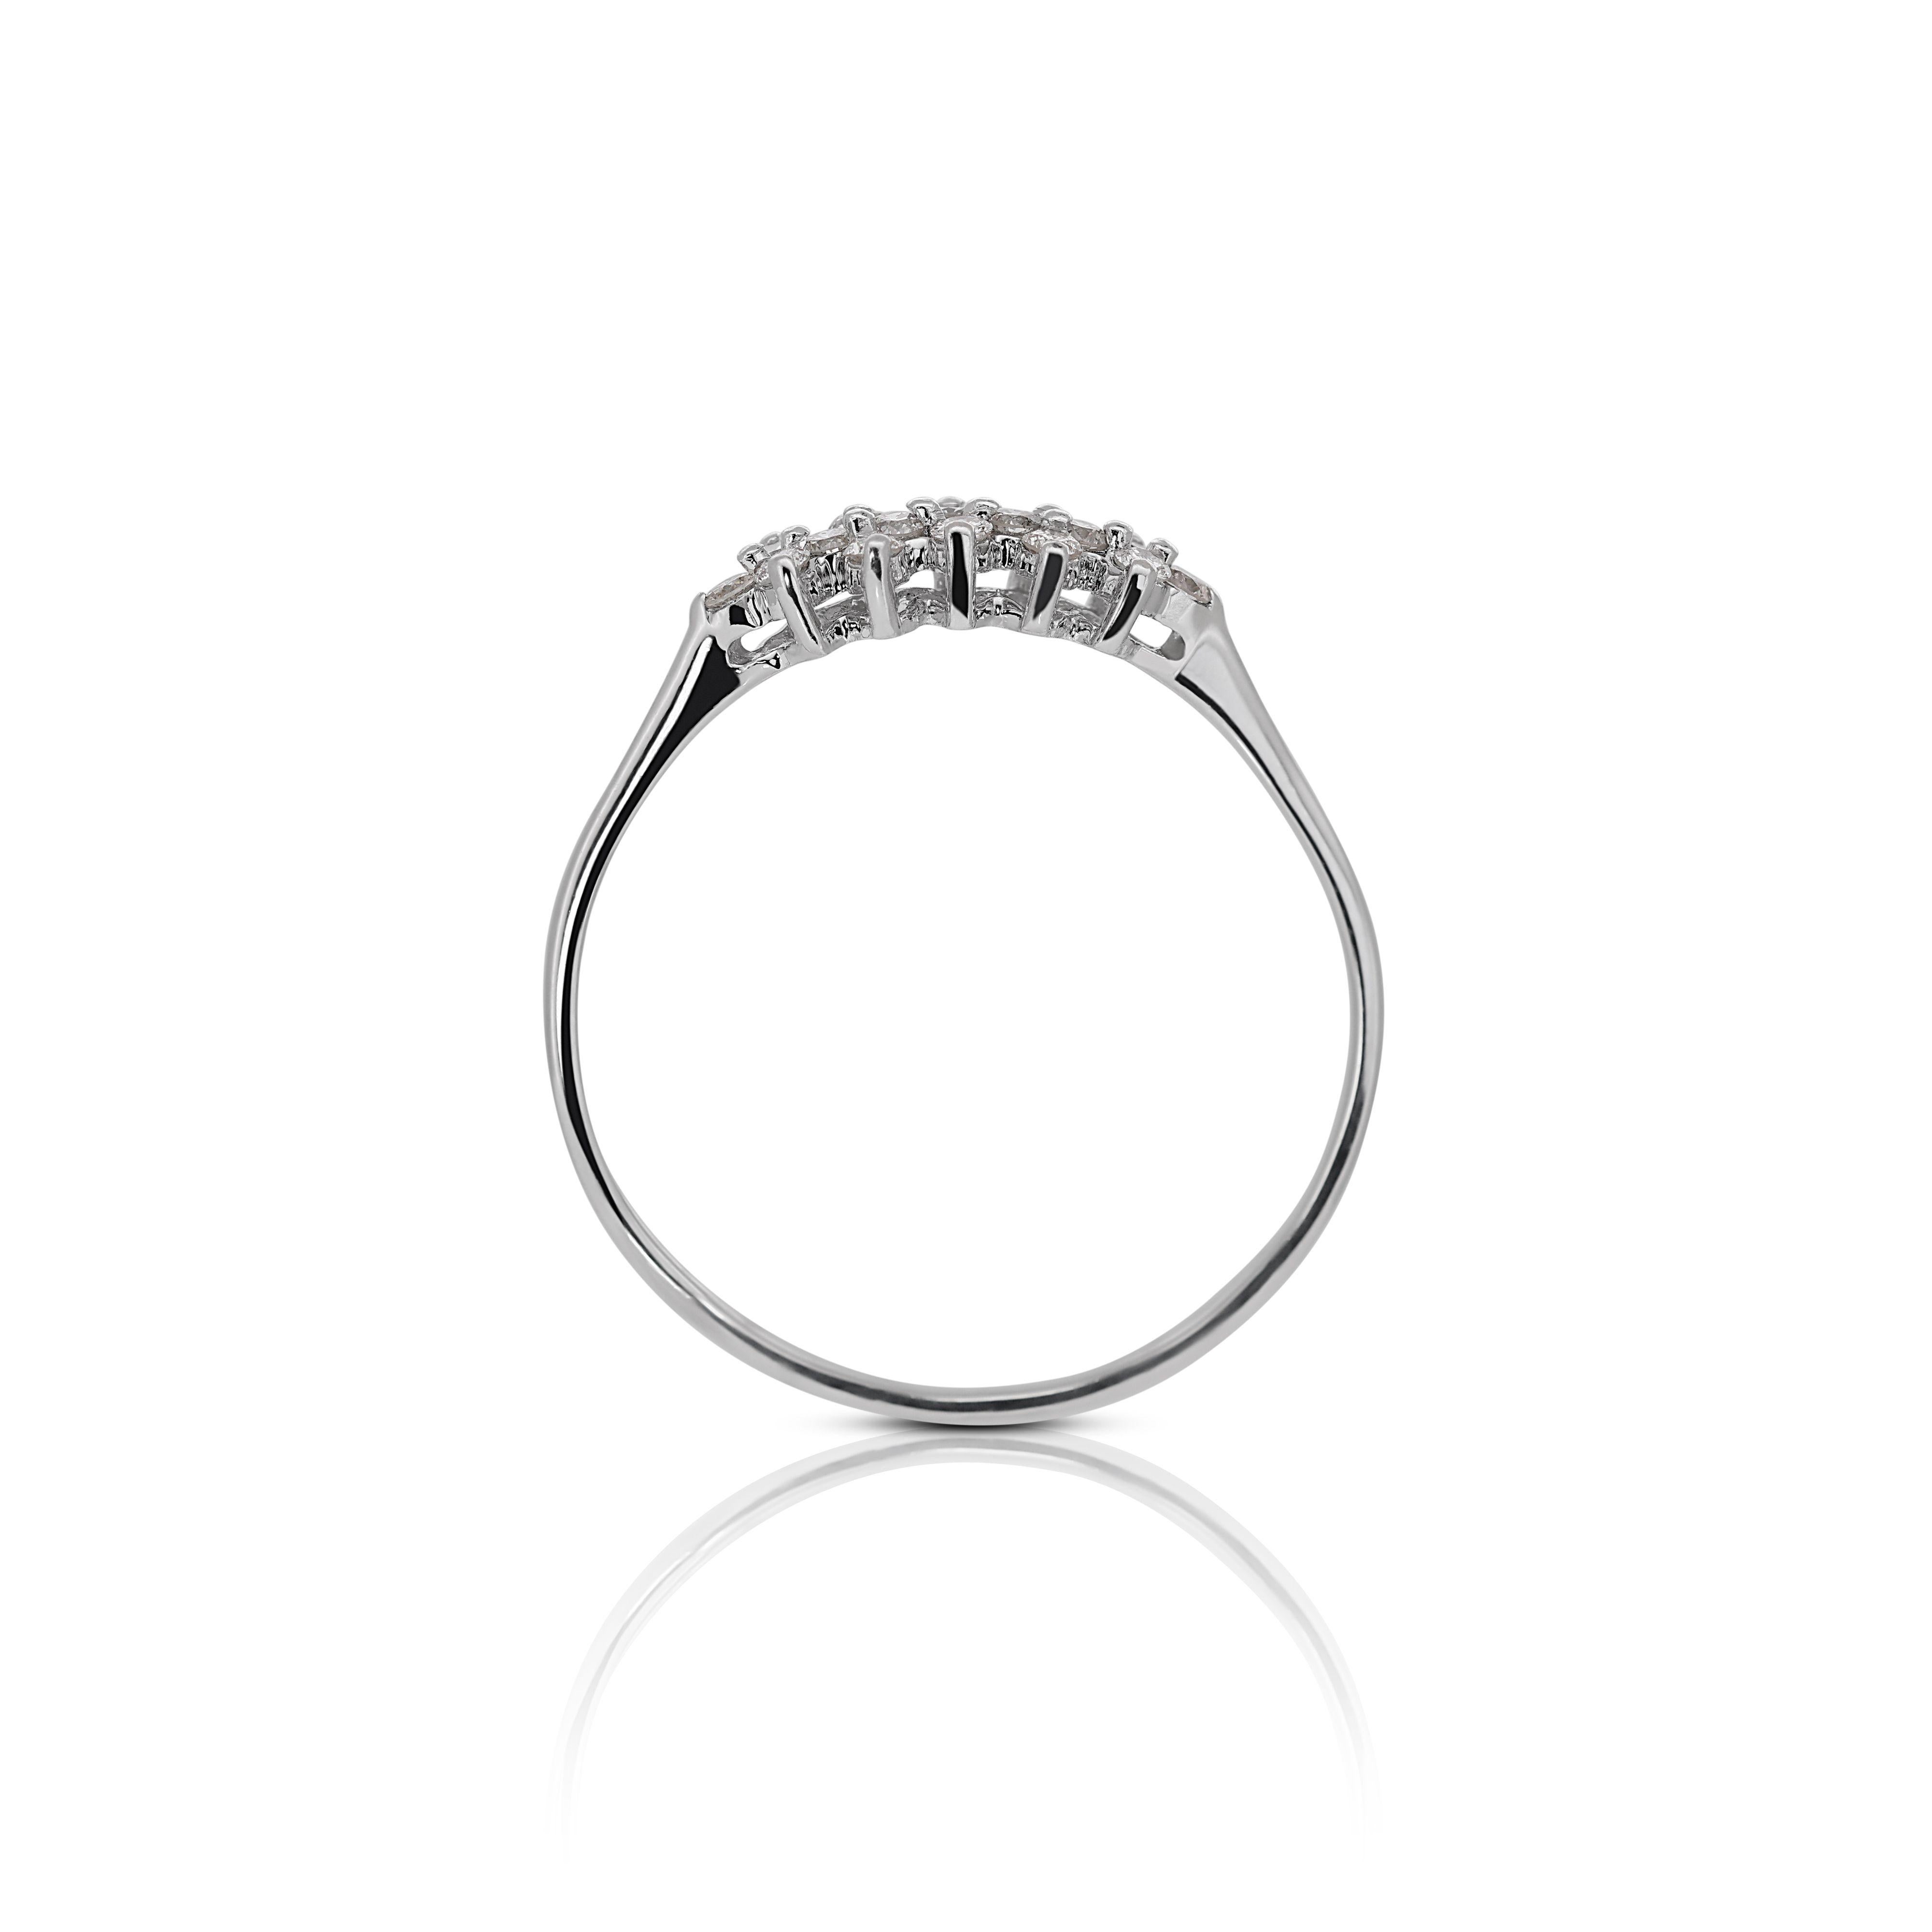 Women's or Men's Exquisite 18K White Gold Diamond Ring with 0.20ct Natural Diamond For Sale